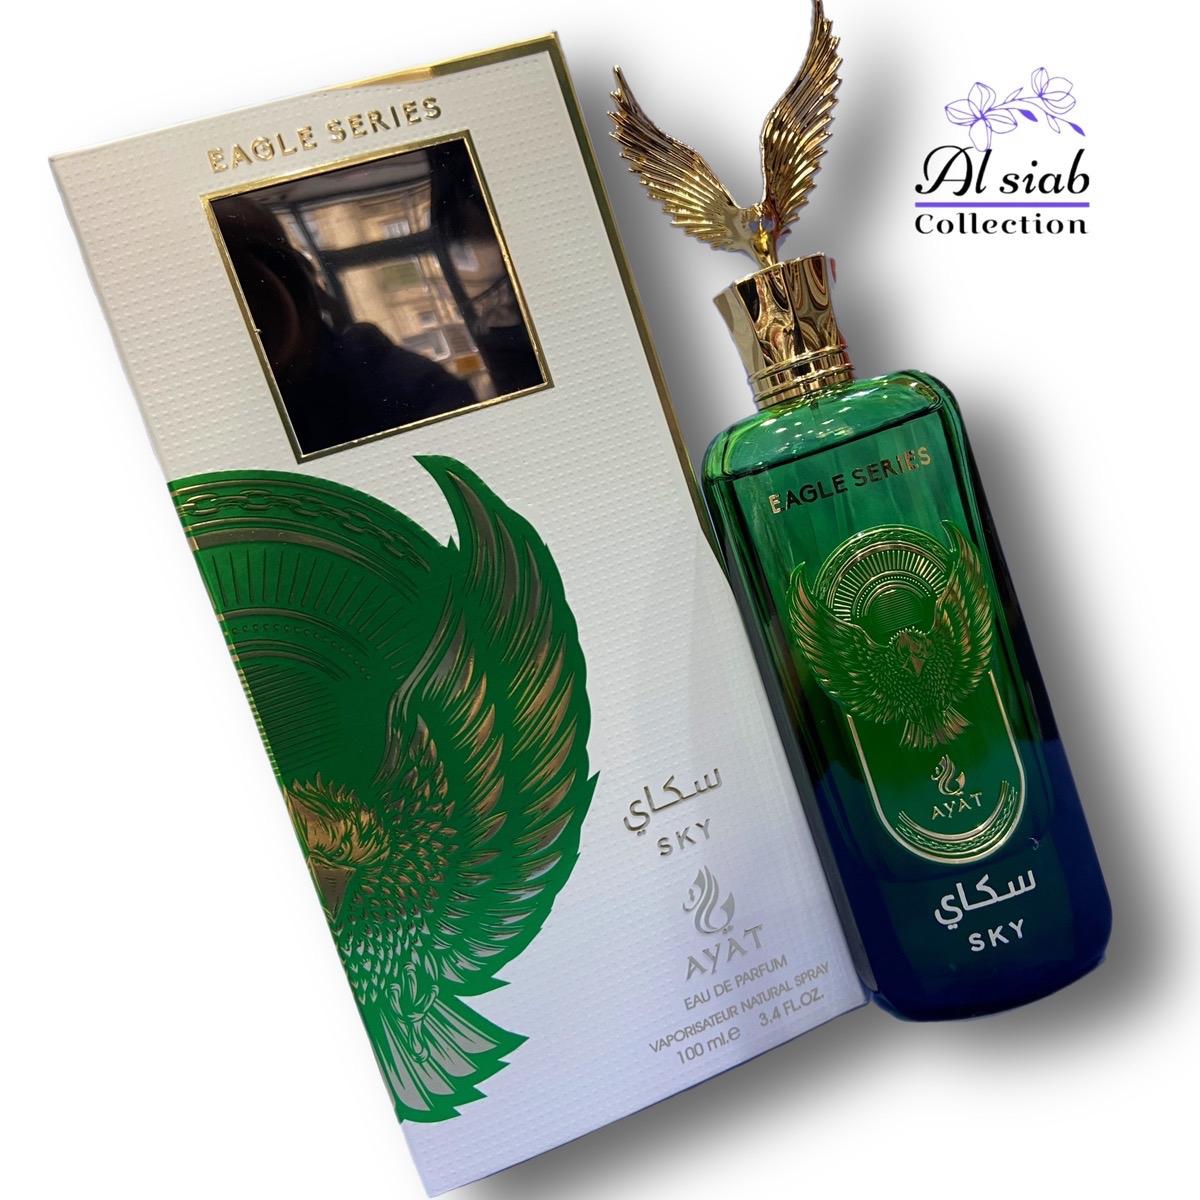 Eau de Parfum EAGLE SERIES 100ml EDP Orientale Arab - For Men and Women - Arabian Scent Made in Dubai Inspired by the Eagle The King Of Birds (Sky)